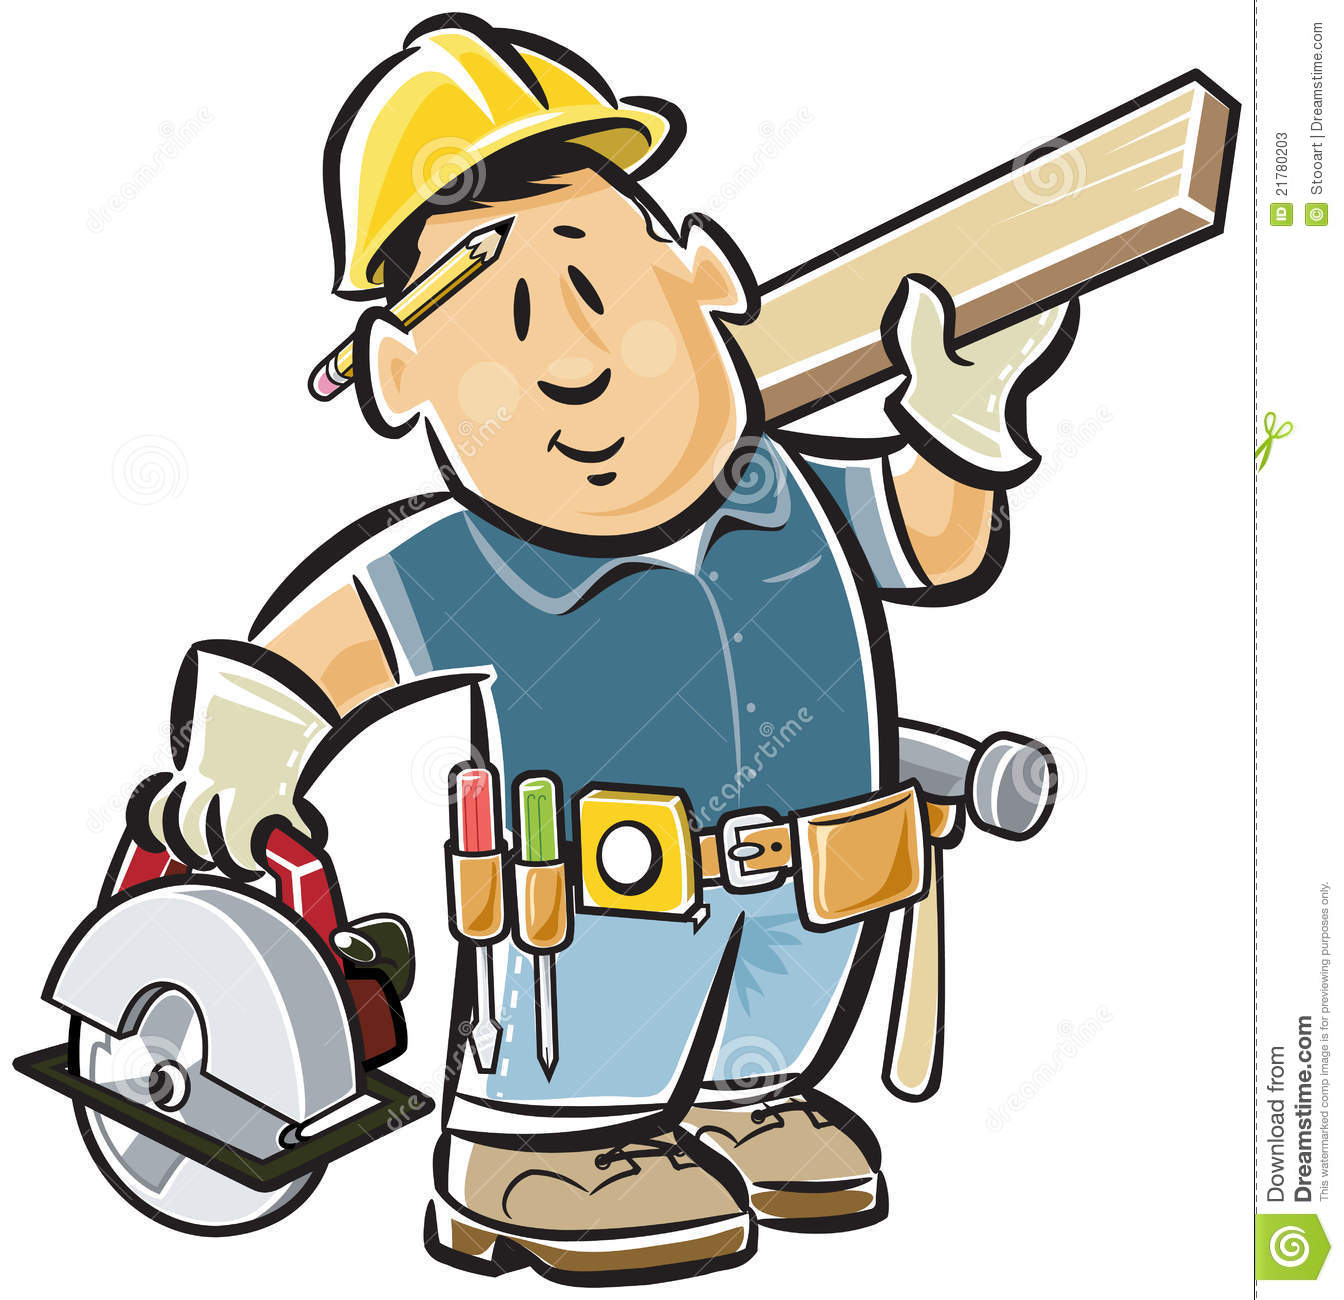 Handyman Carpenter Wearing A Tool Belt Carrying An Electric Saw And